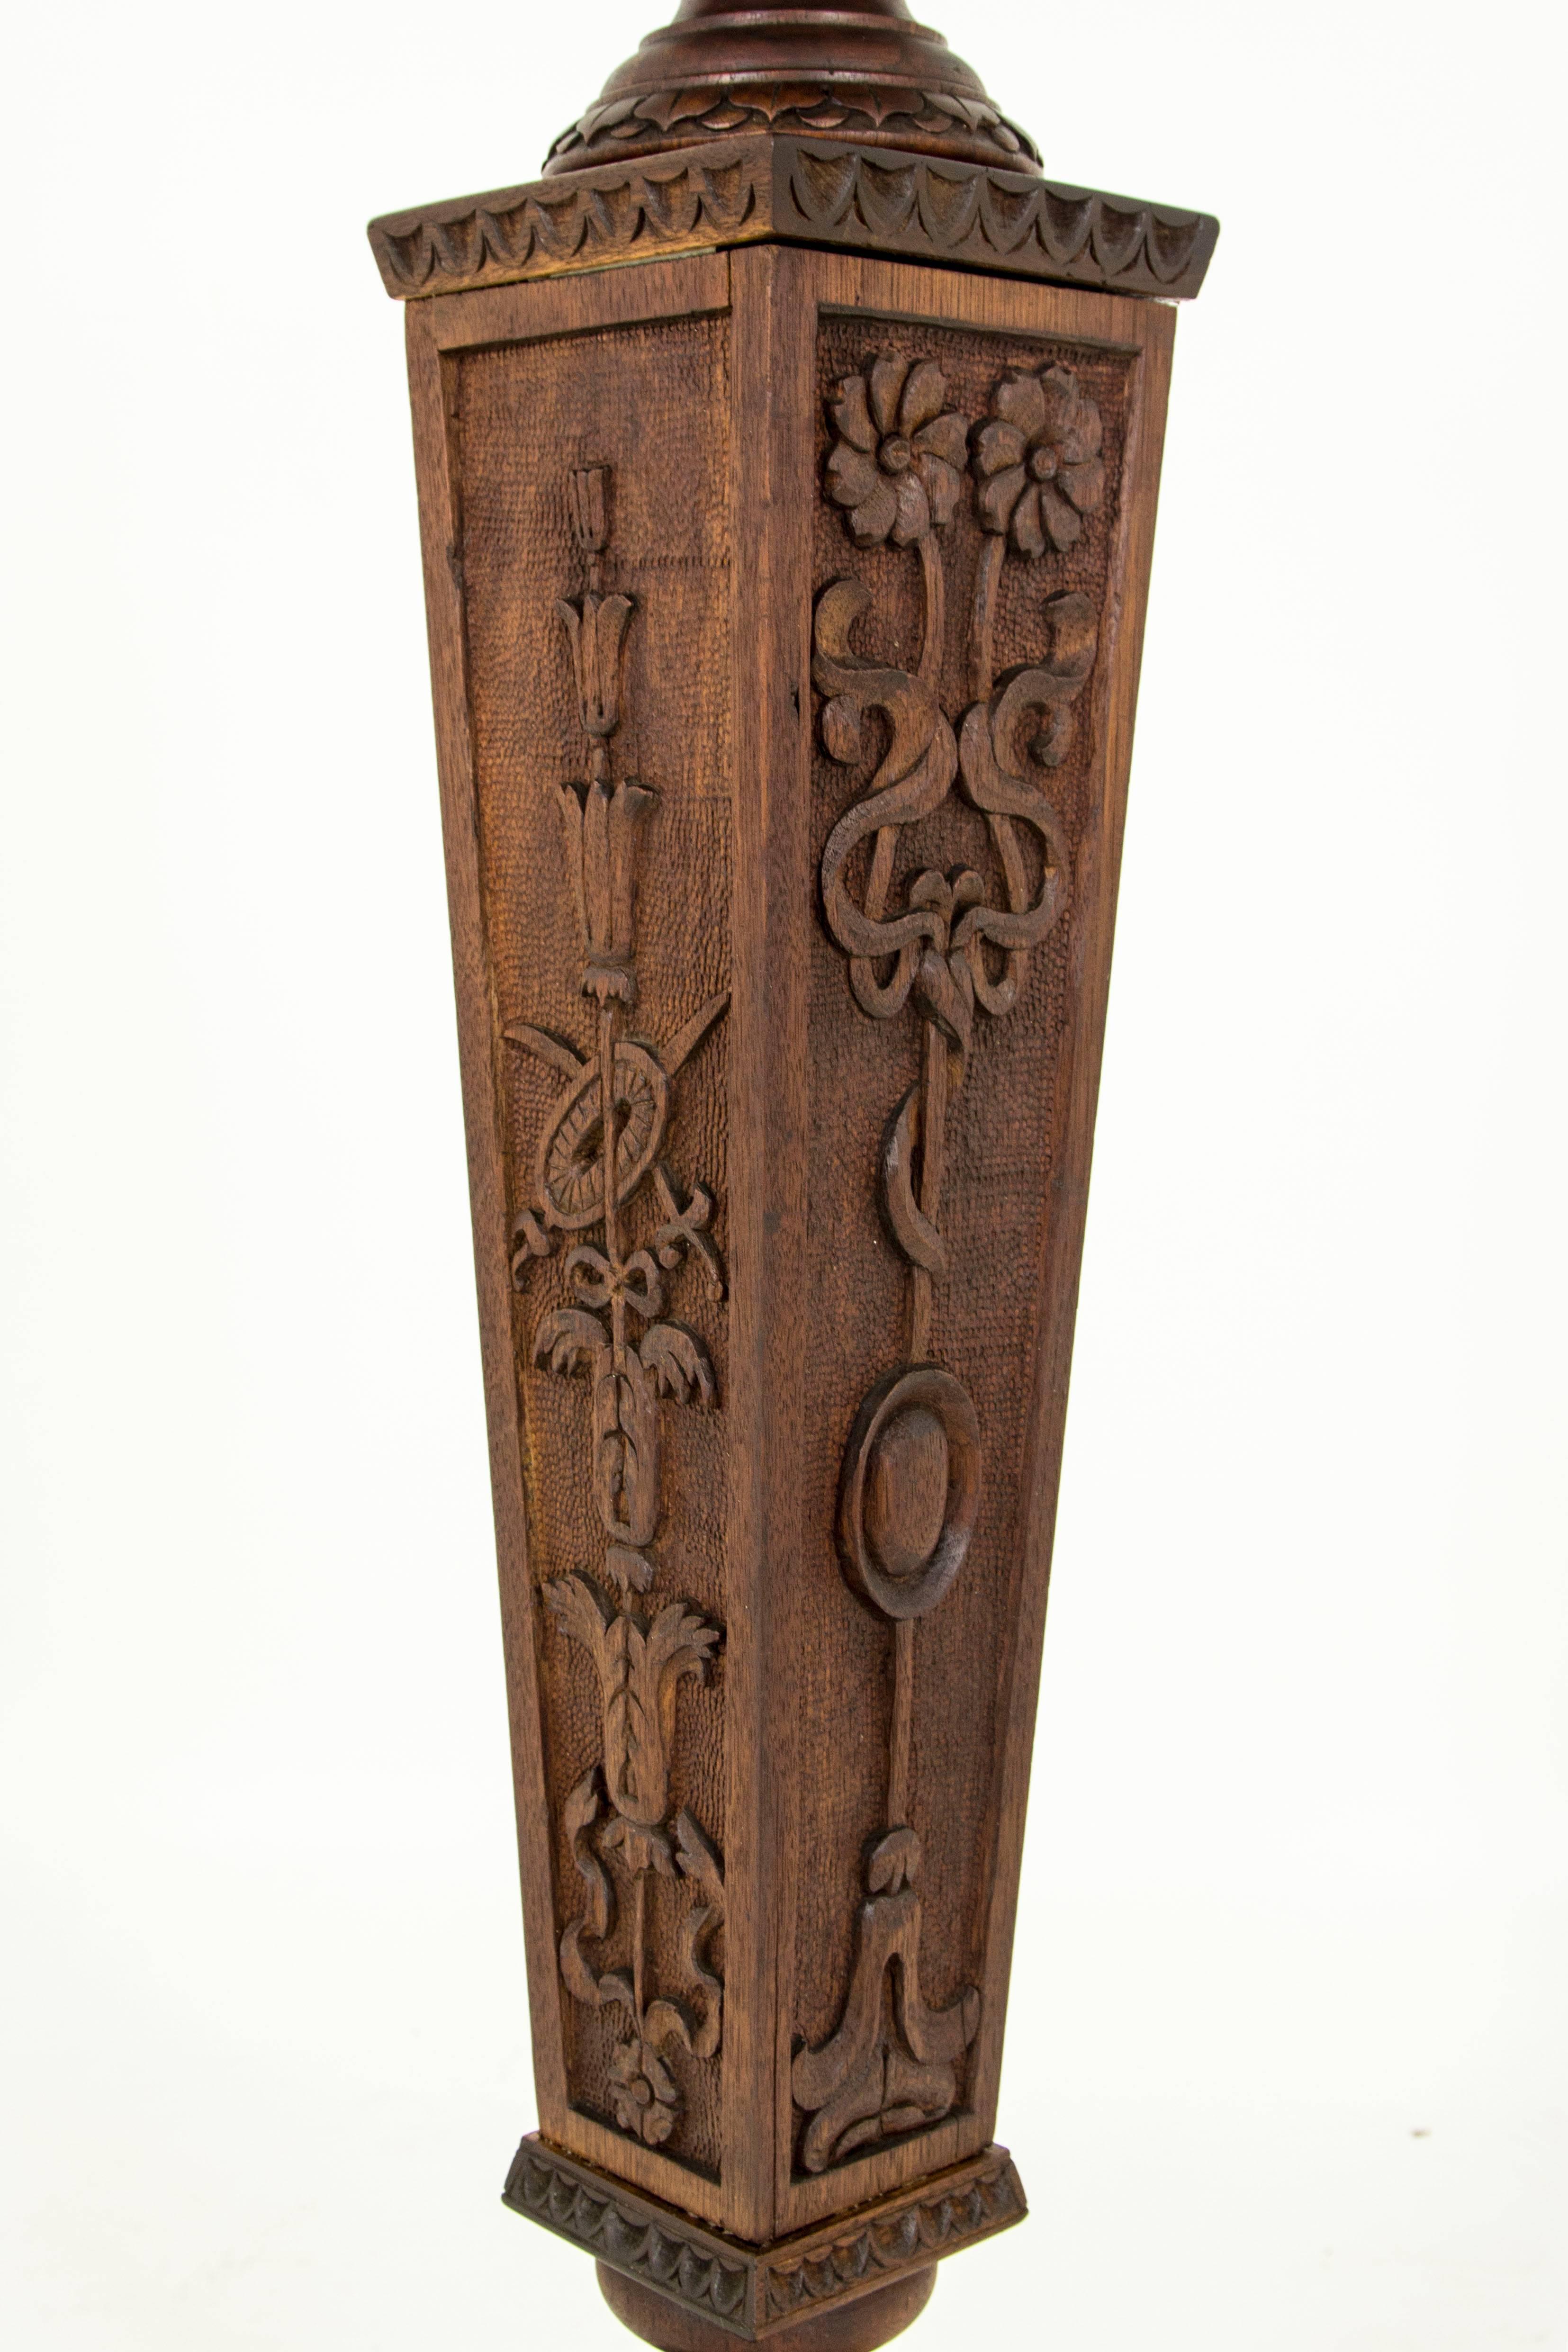 Scotland,
1870.
All original finish.
Solid mahogany construction.
Carved square top.
Urn shaped below.
Four sided carved stem, ending on circular stem, sitting on a carved base.

Was $1250 now just $750.

B570.
12